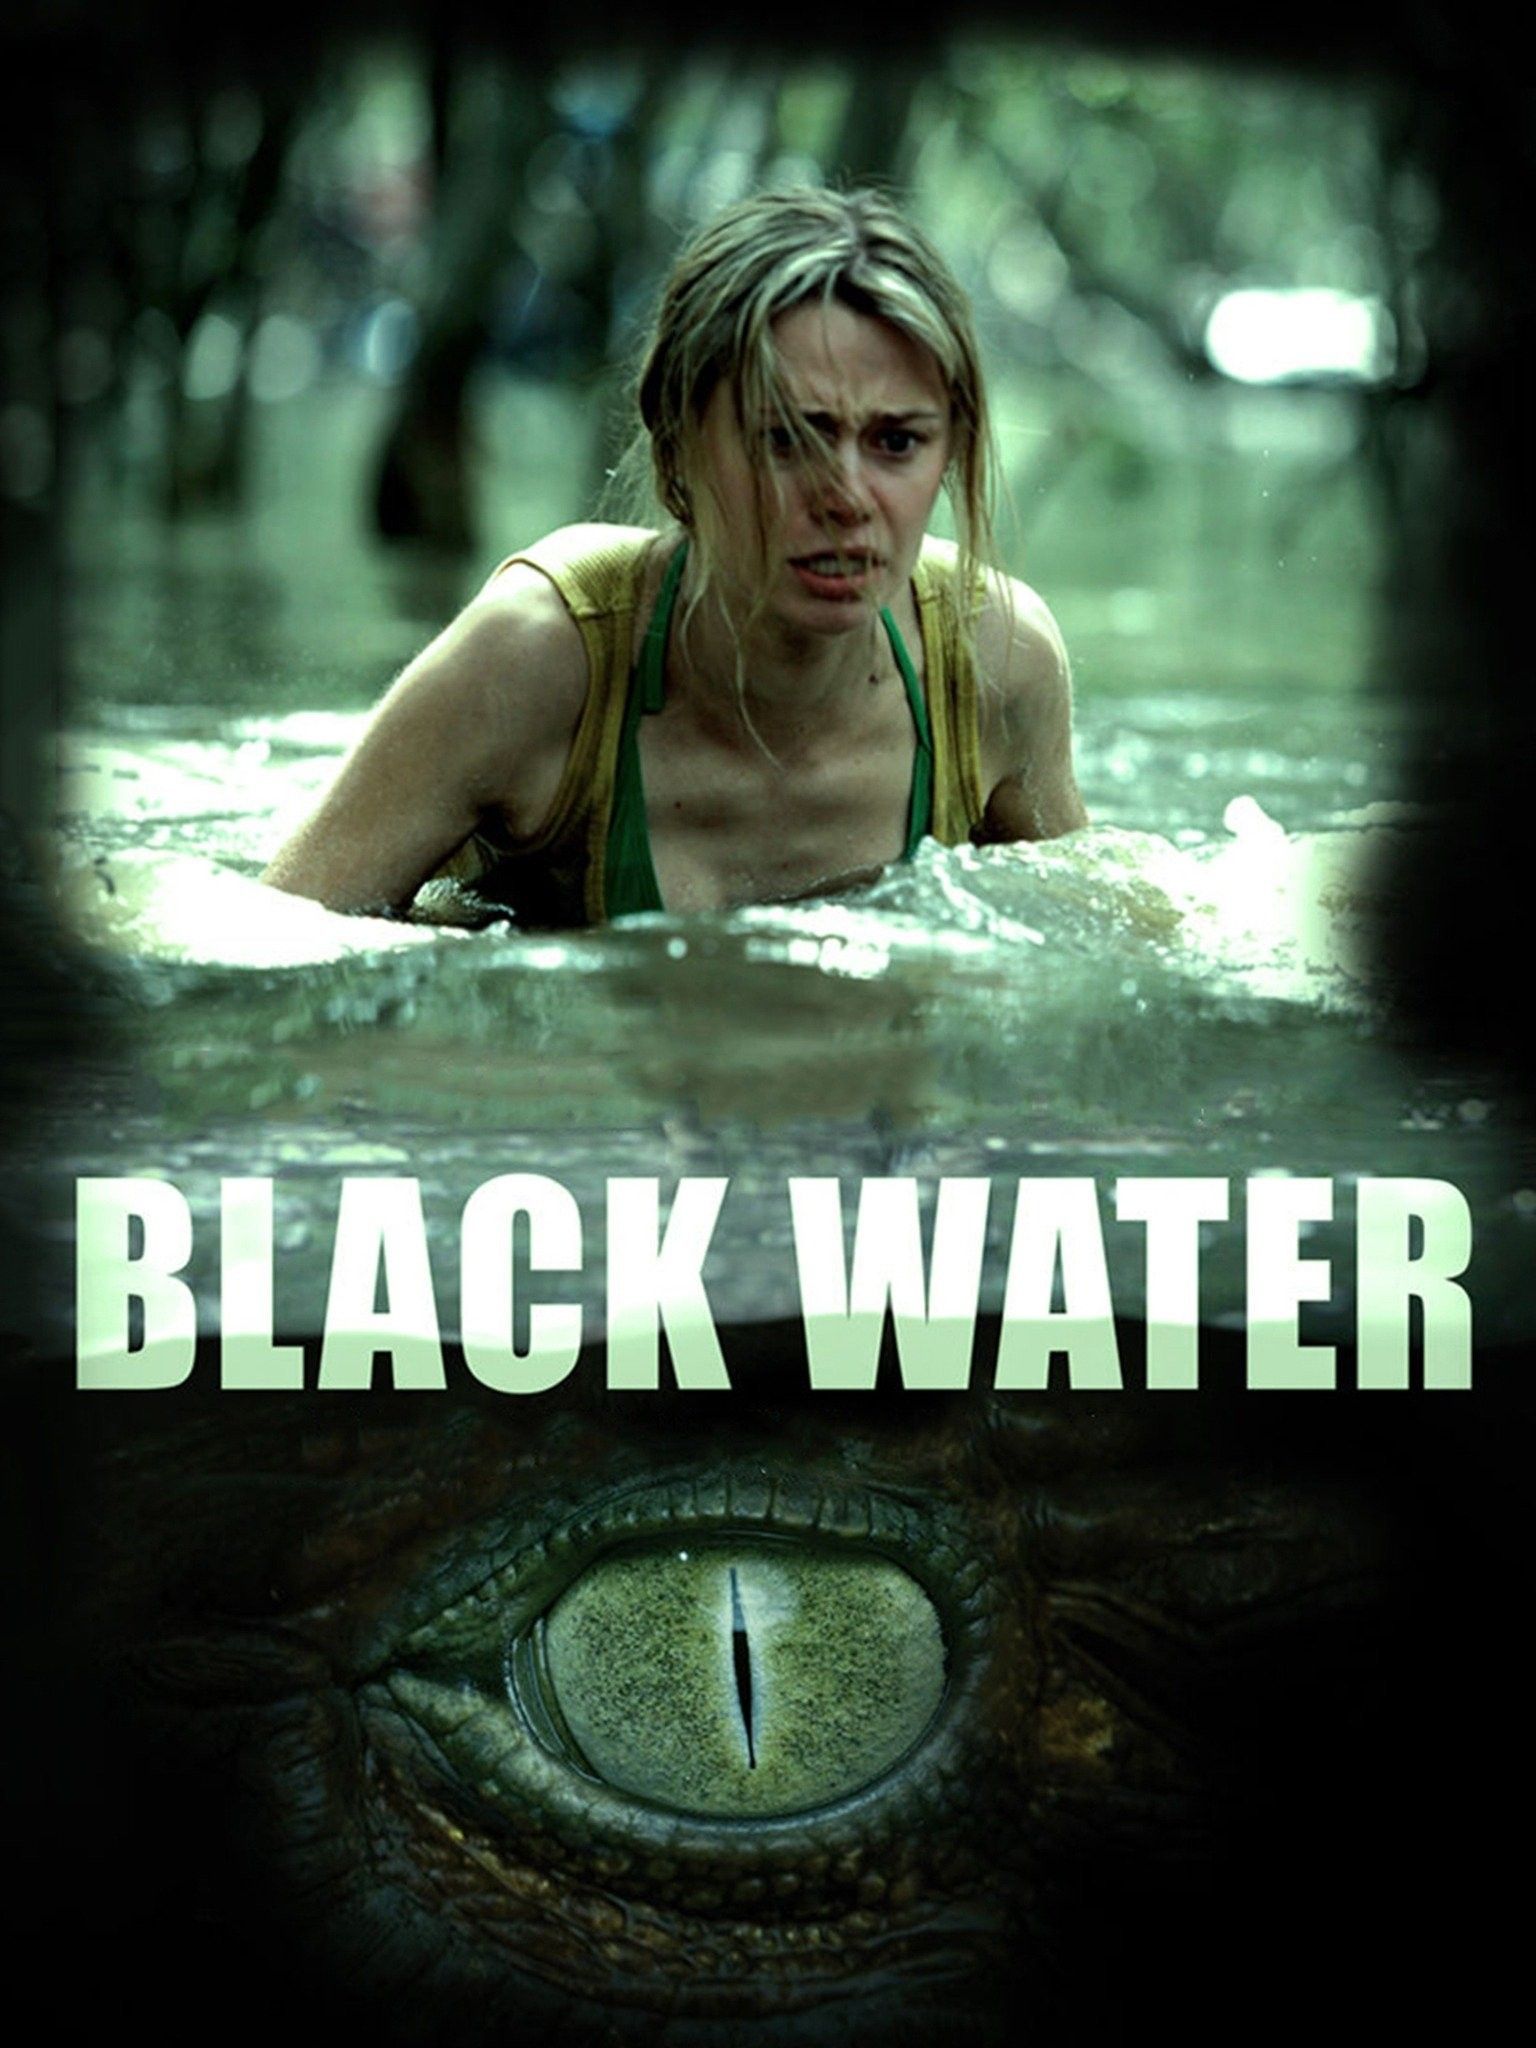 Maeve Dermody in the Water with an Alligator Eye underneath Her on Black Water Poster-1